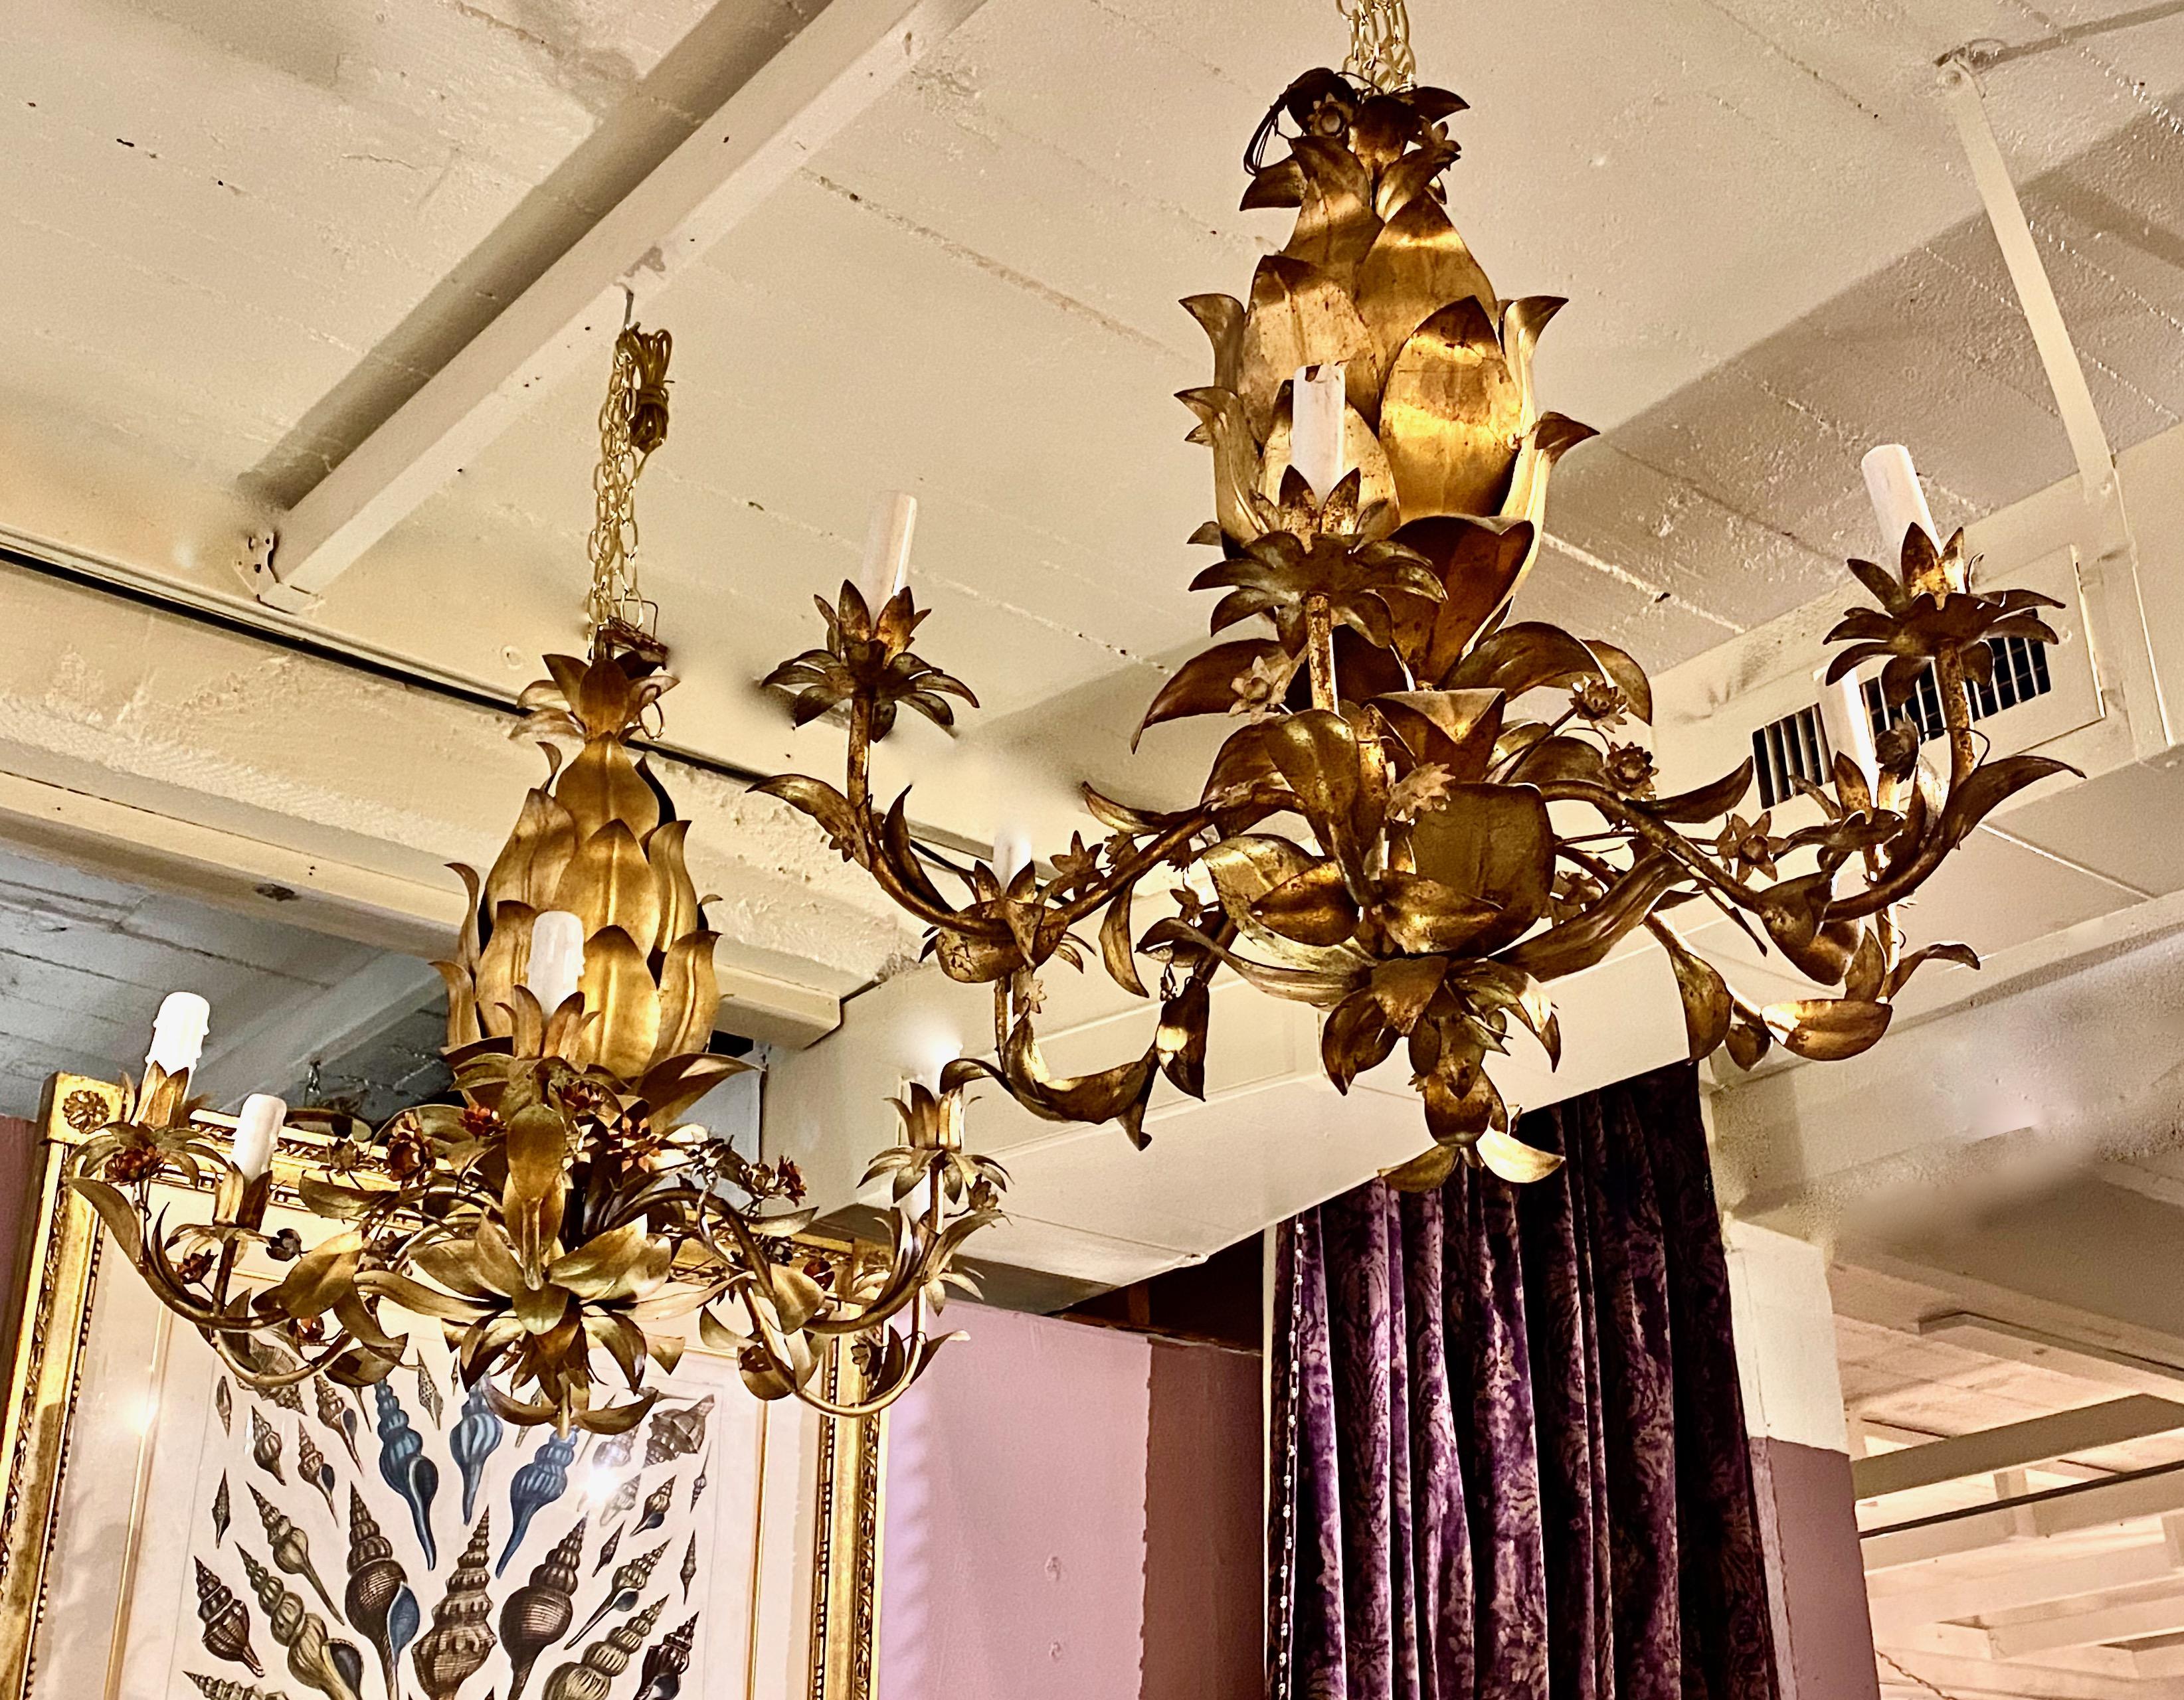 This is a fun near pair of c. 1960-1970 Italian gilt tole chandeliers in the form of a pineapple with painted tole flowers. The chandeliers are in very good overall condition with normal patination to the gold leaf. The wiring has been